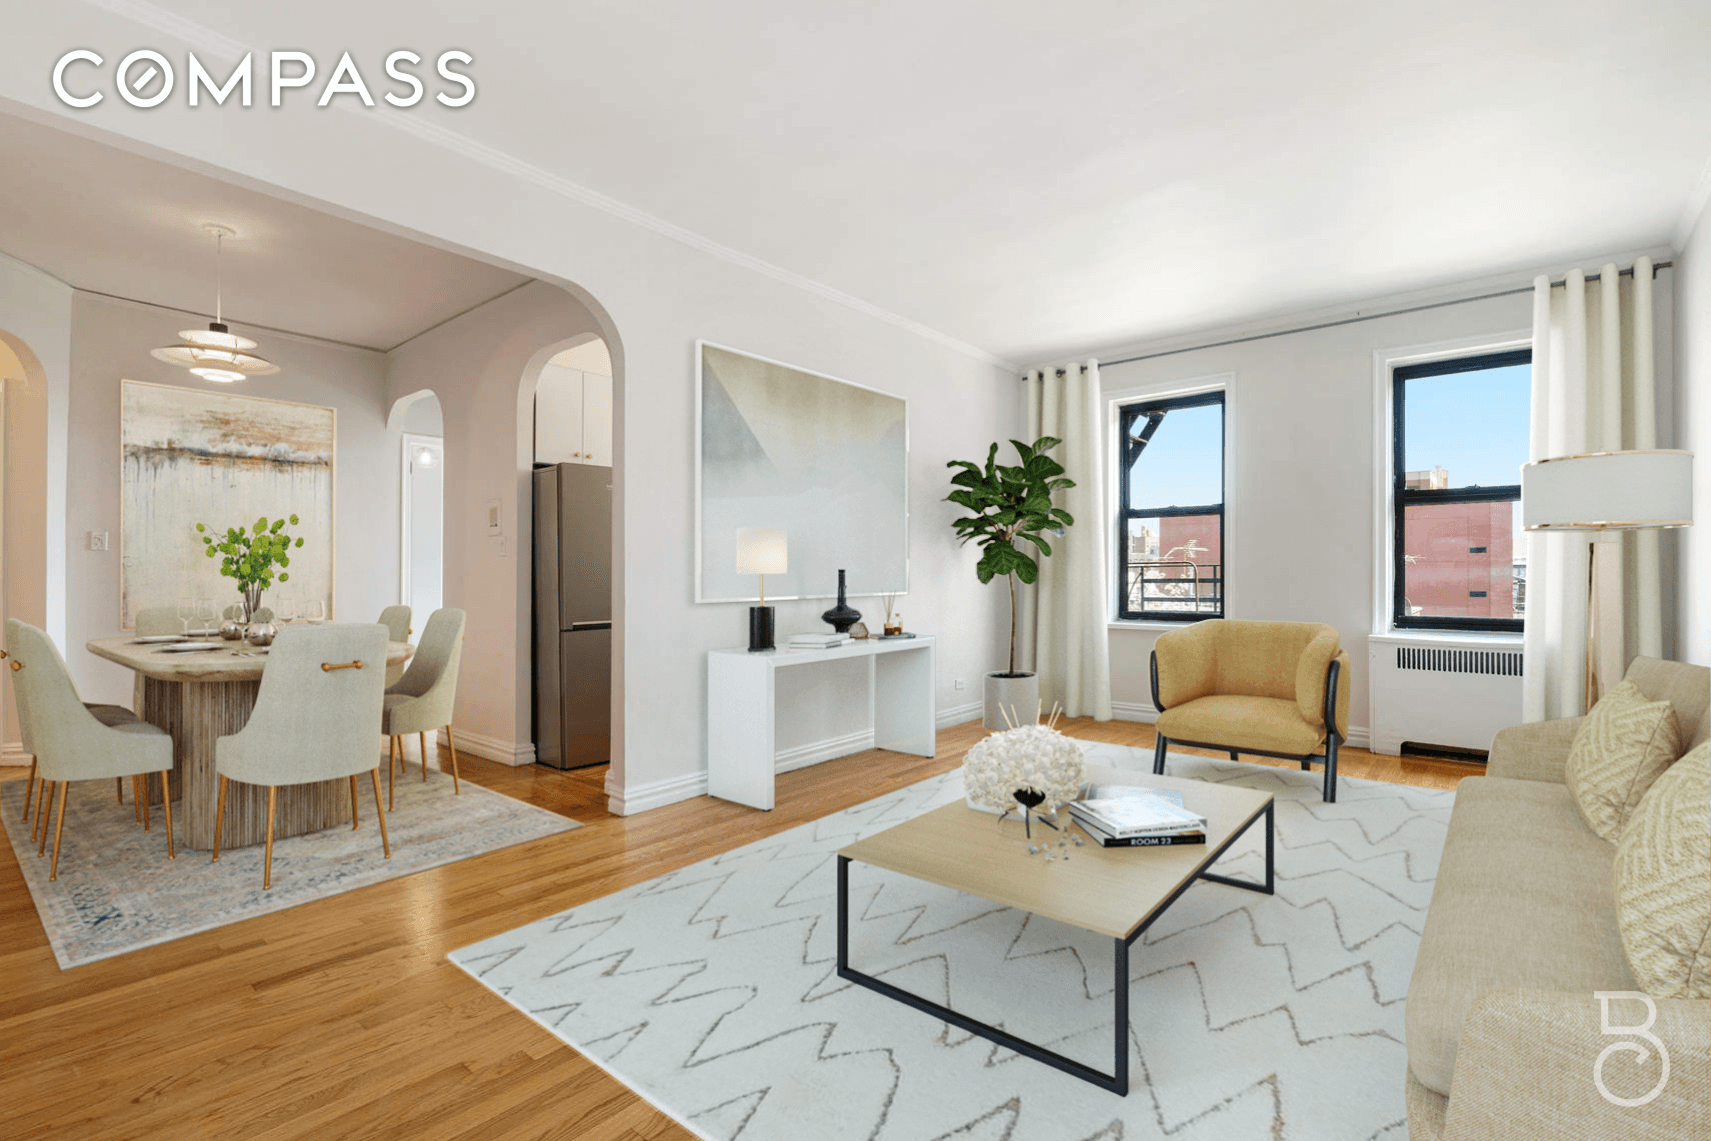 Generously proportioned and bright, this extra spacious 1 bedroom features a newly gut renovated, windowed bathroom, and mint condition modern kitchen with stainless steel appliances.